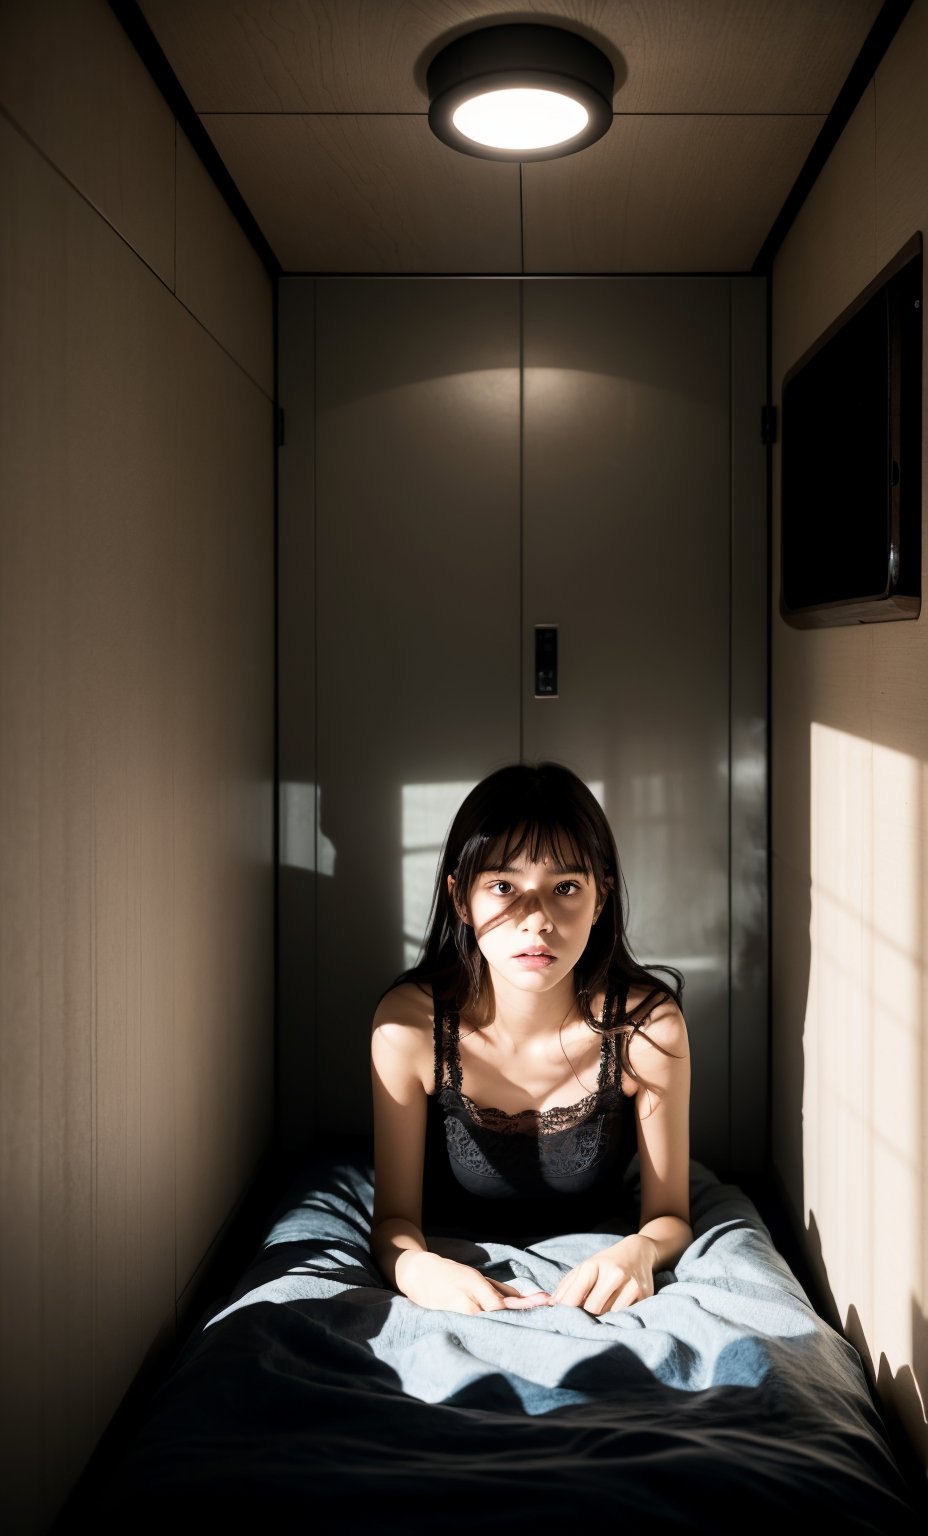 A dimly lit, compact chamber with windowless walls, the only illumination coming from artificial sources that eerily cast a flat, shadow-less glow. A young woman perches on the edge of a small, single berth bed, her eyes wide with bewilderment and panic as she takes in her confined quarters without an exit door to be seen.